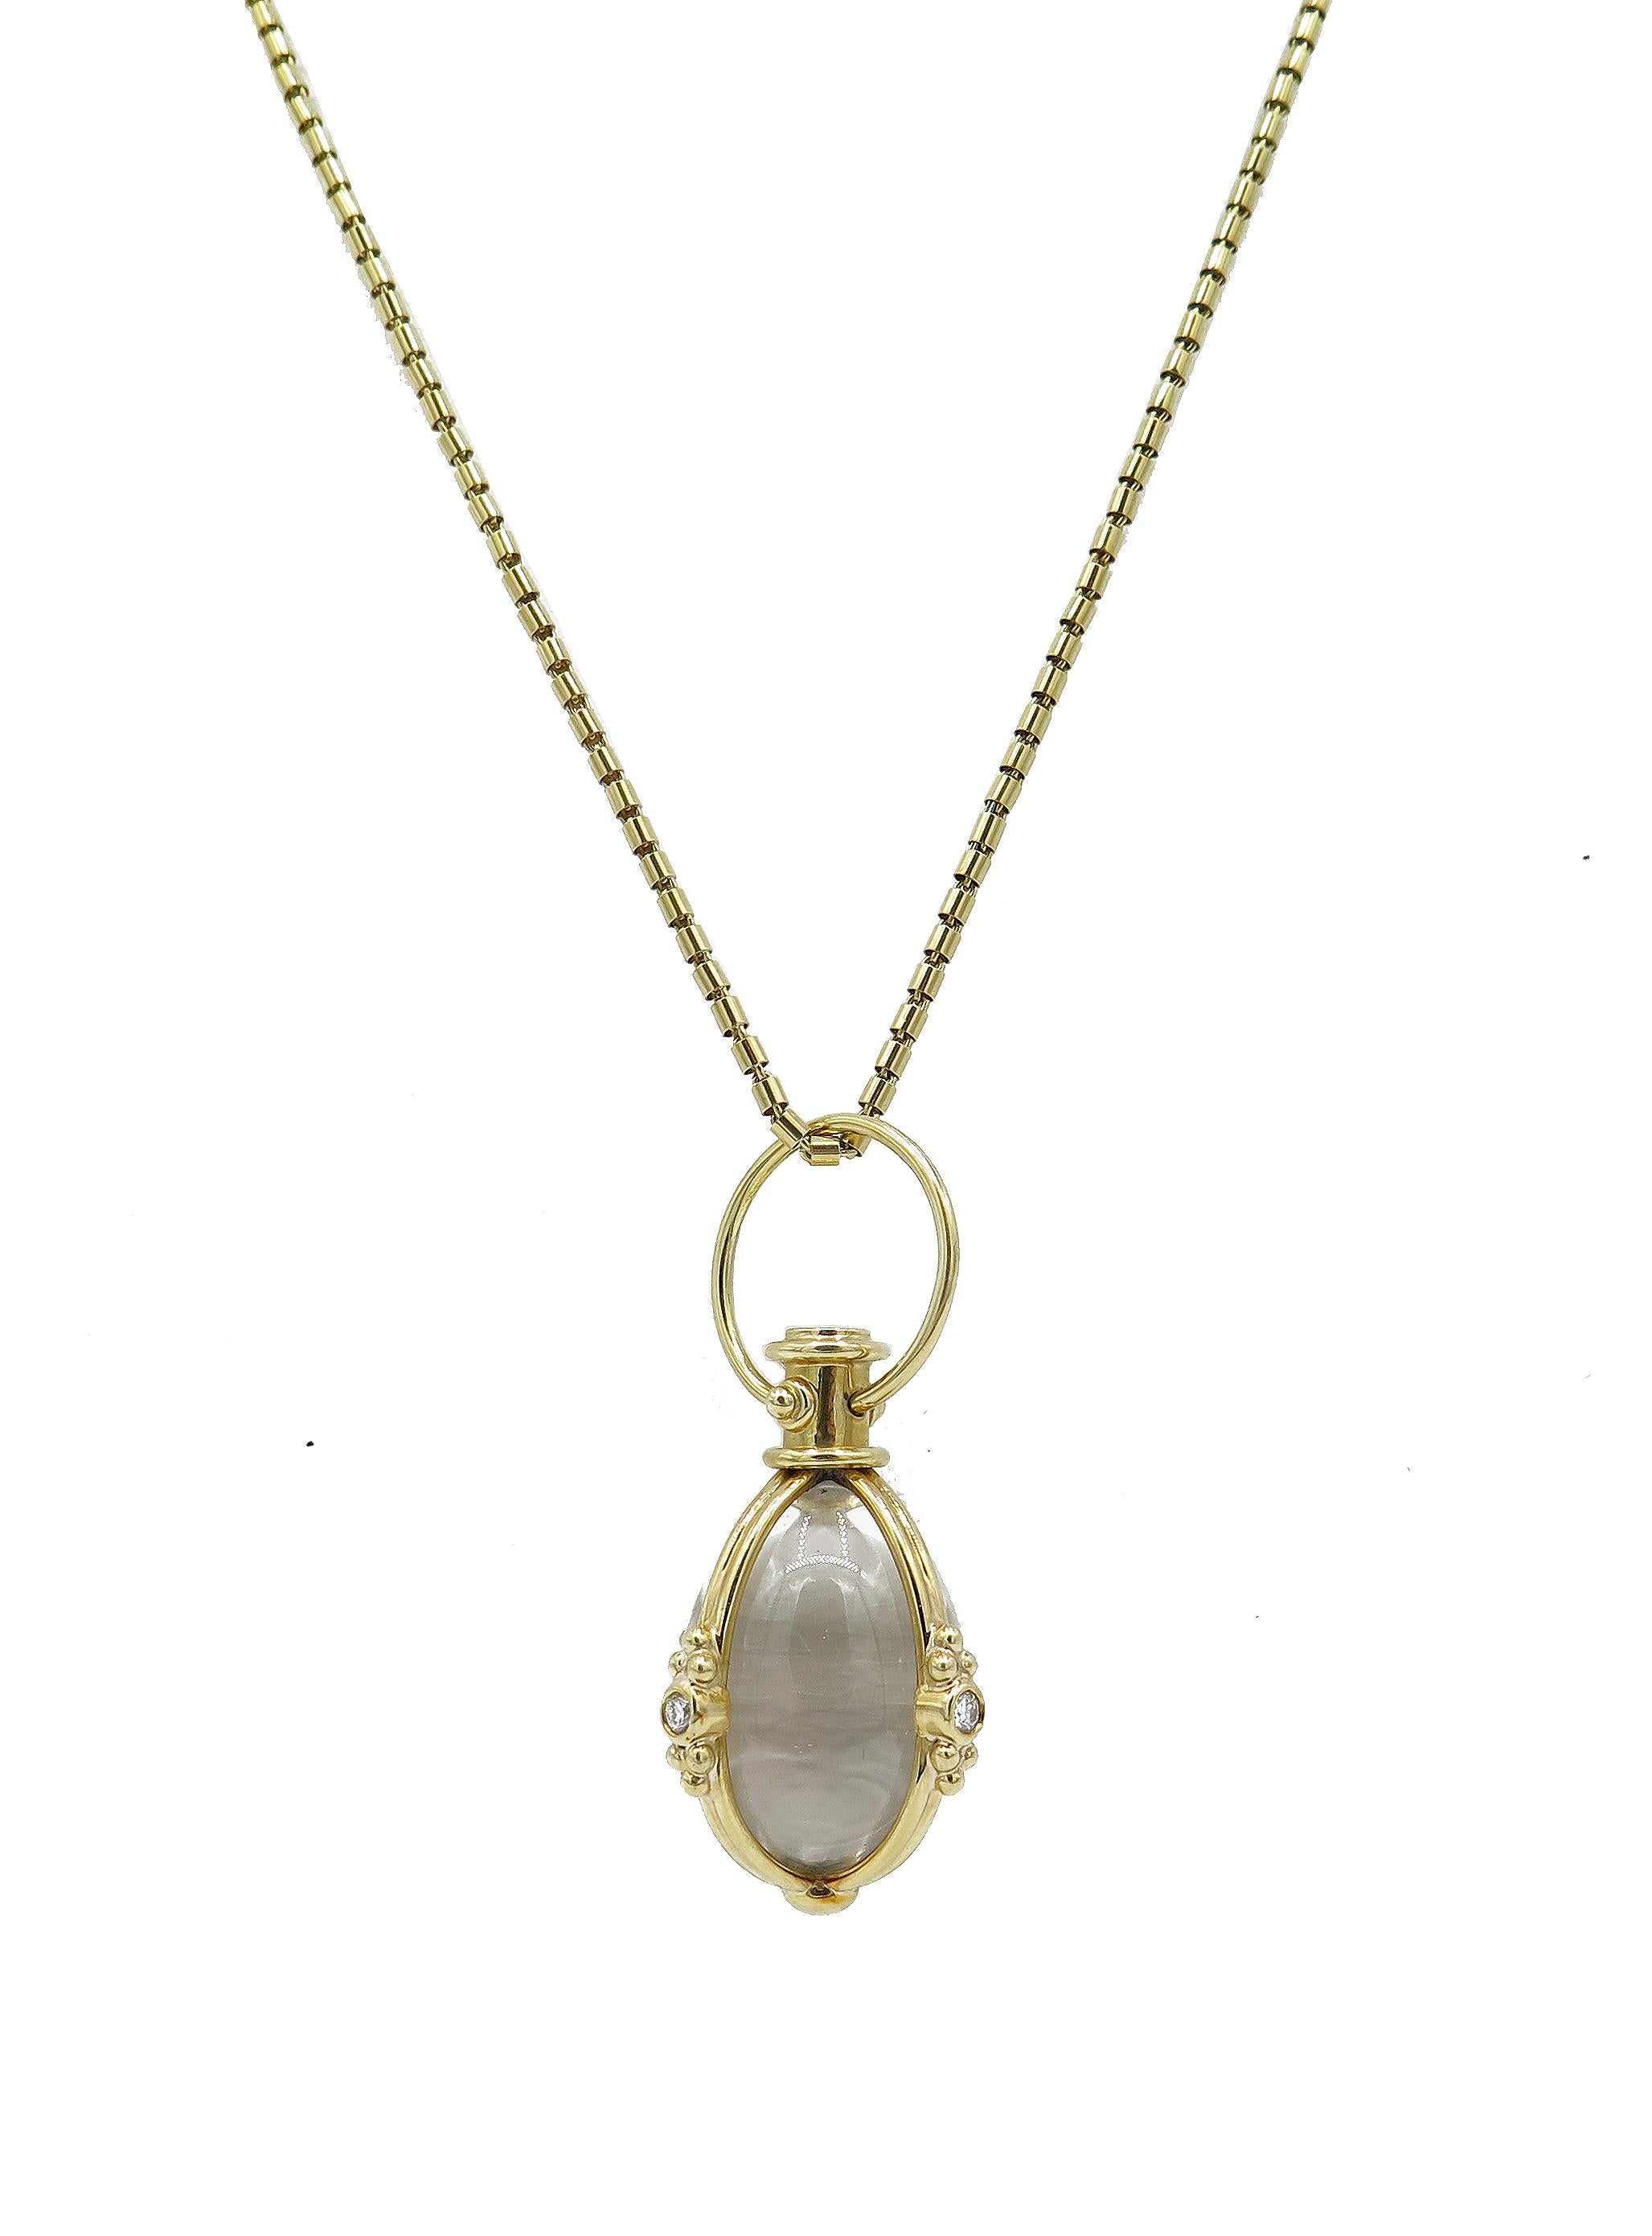 Gorgeous Temple St. Claire Pendant with Polished Rock Crystal and Diamonds. Ornate and elegant, this neck jewel is 18k yellow gold with 0.24cts of diamonds set in the delicate detail of the oval setting. The pendant measures 2 inches long and 0.9